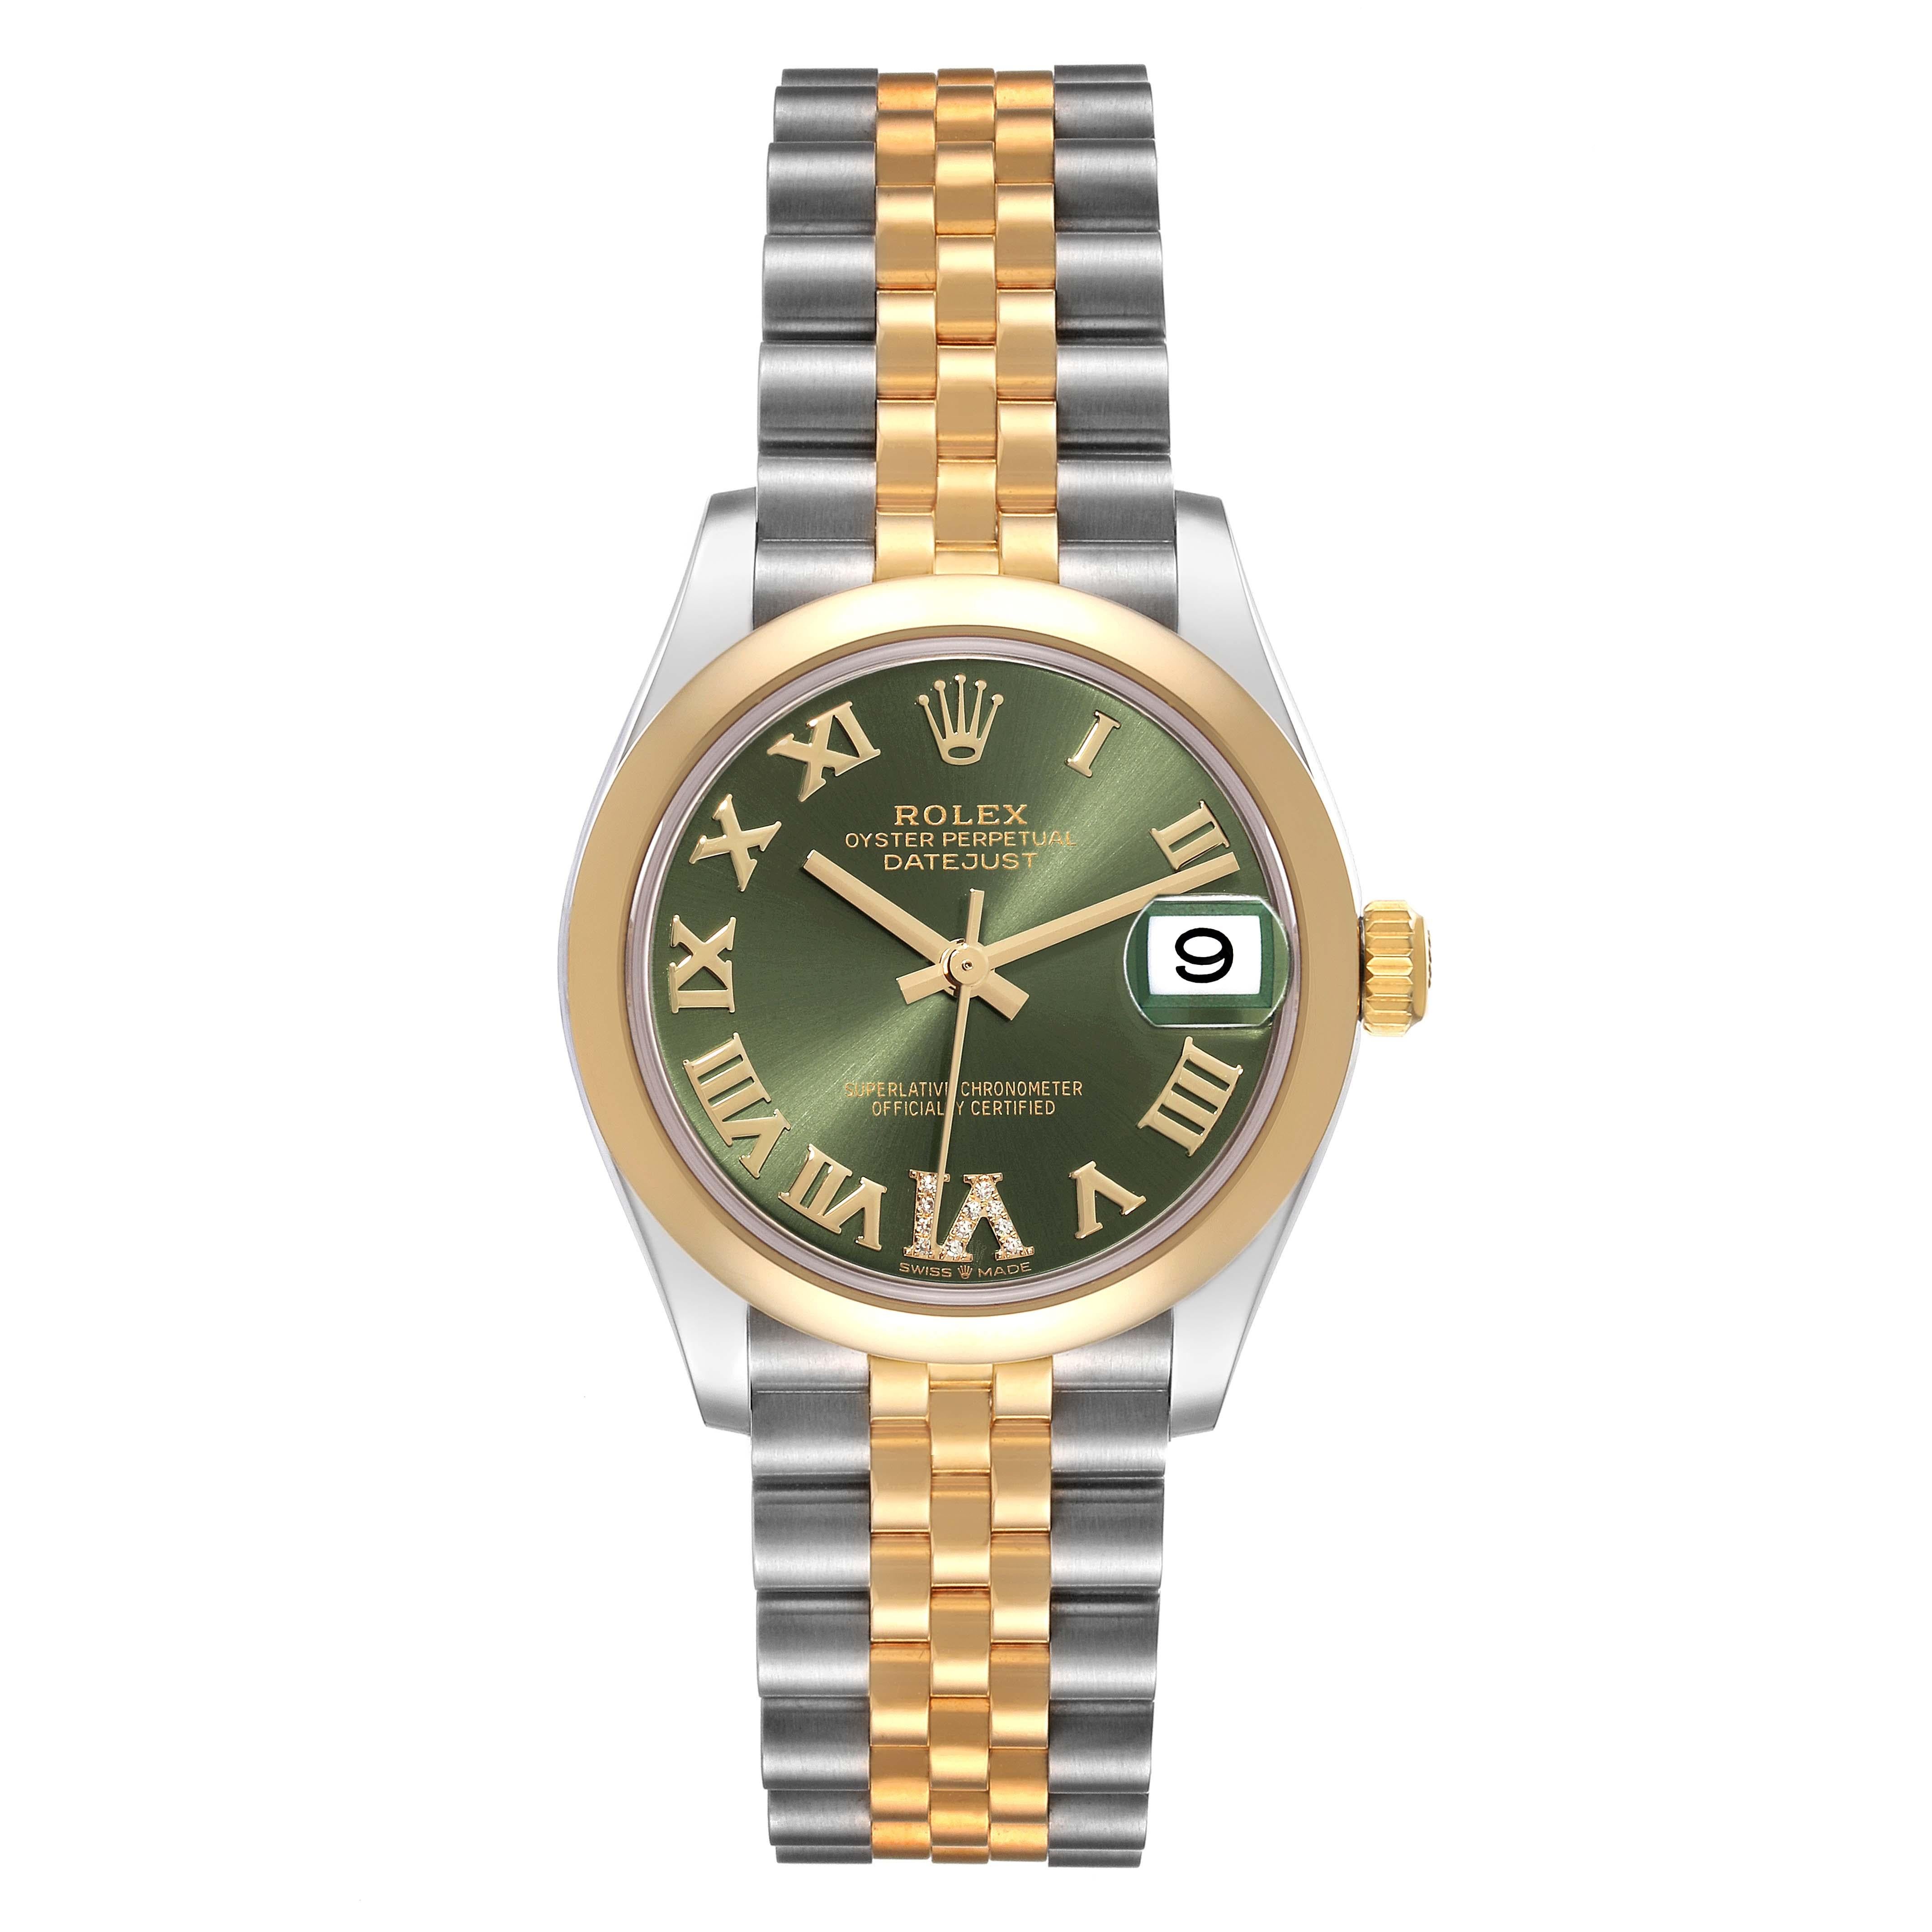 Rolex Datejust Midsize Steel Yellow Gold Diamond Ladies Watch 278243 Box Card. Officially certified chronometer self-winding movement. Stainless steel oyster case 31.0 mm in diameter. Rolex logo on a crown. 18k yellow gold smooth domed bezel.